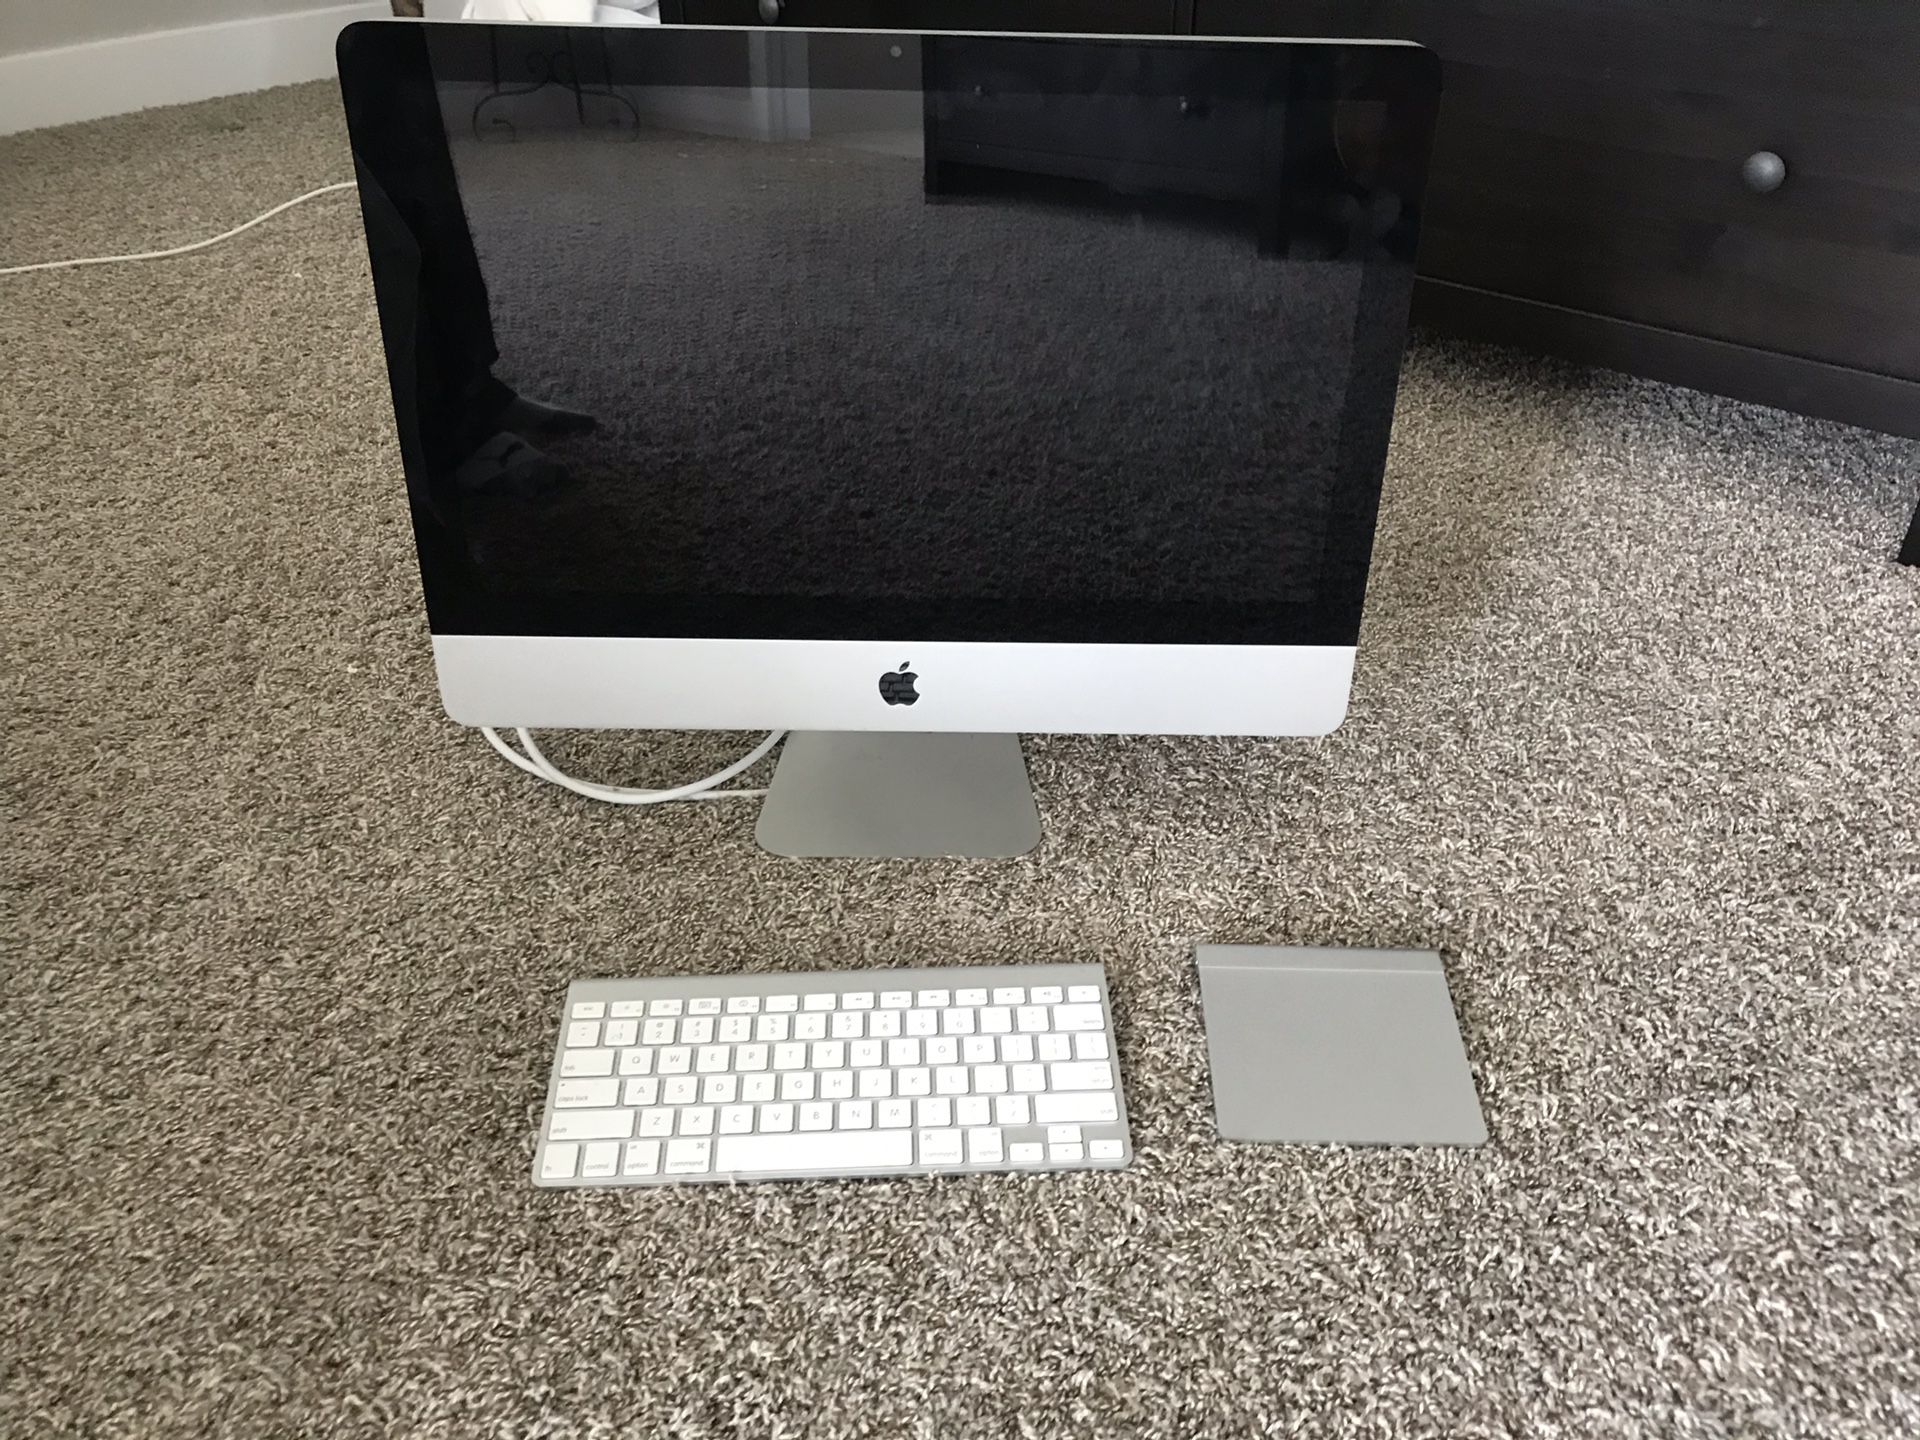 Older iMac (Free to students only)